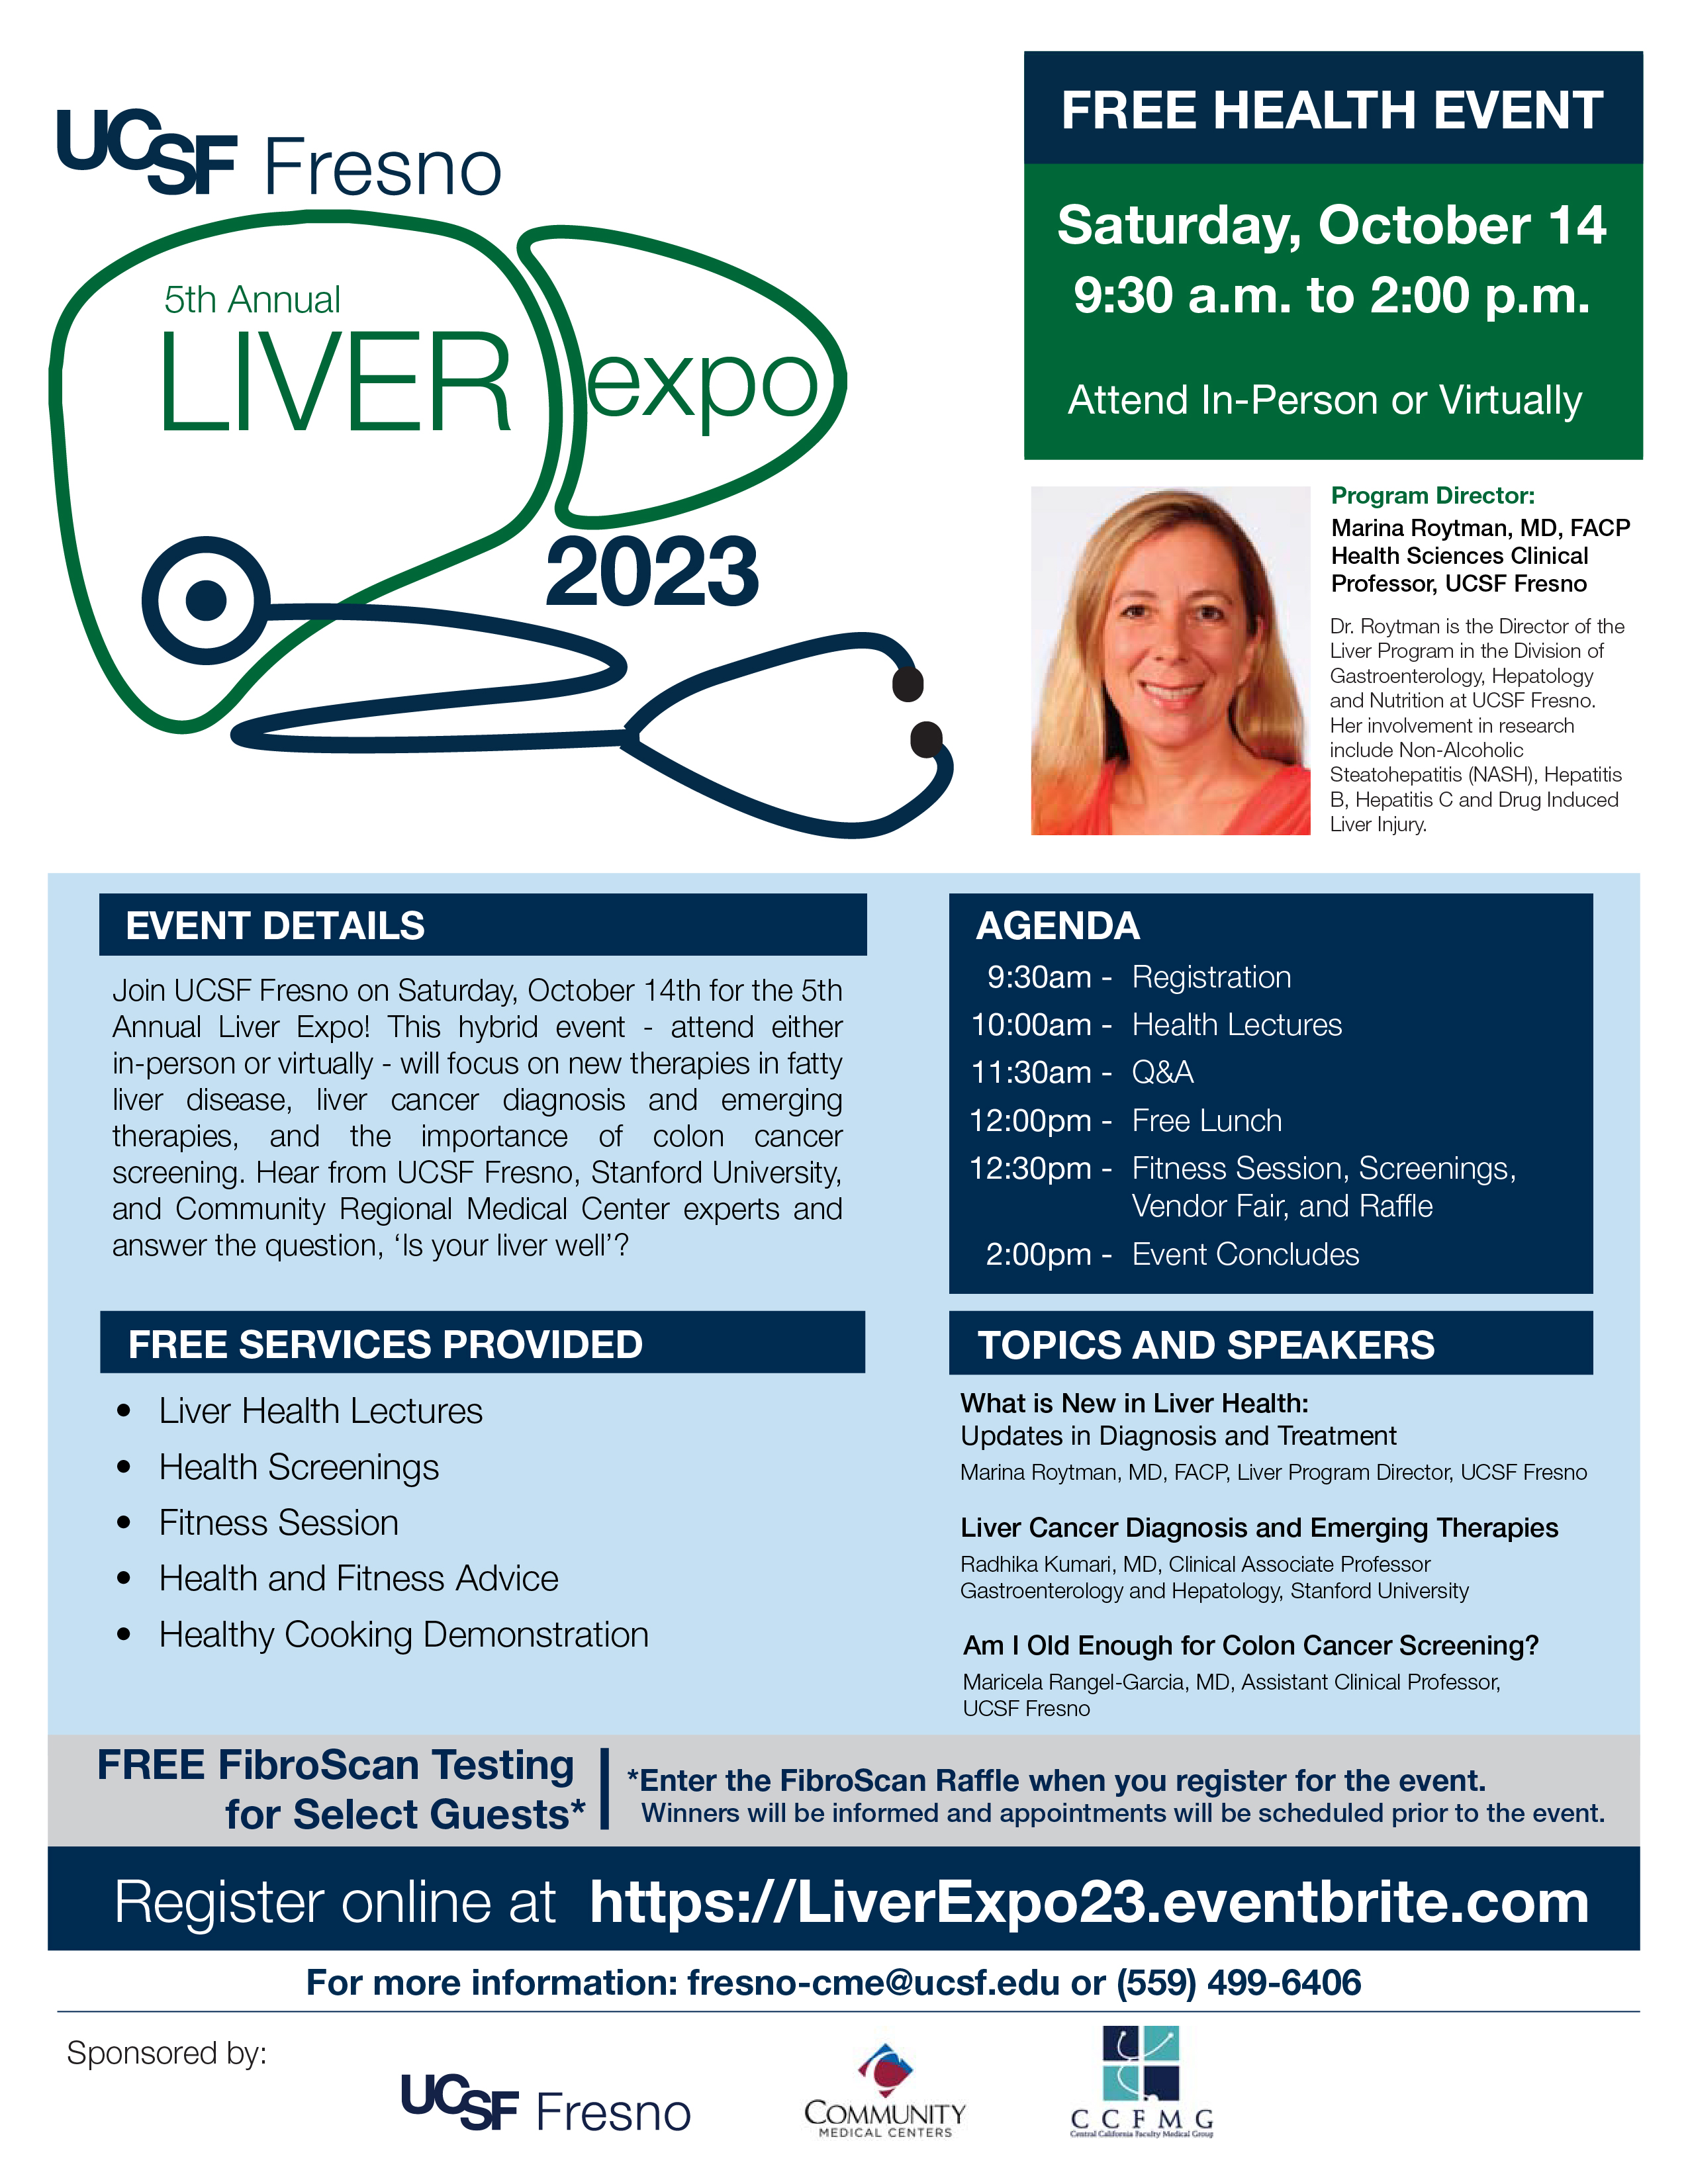 5th Annual Liver Expo Flyer and Event Details